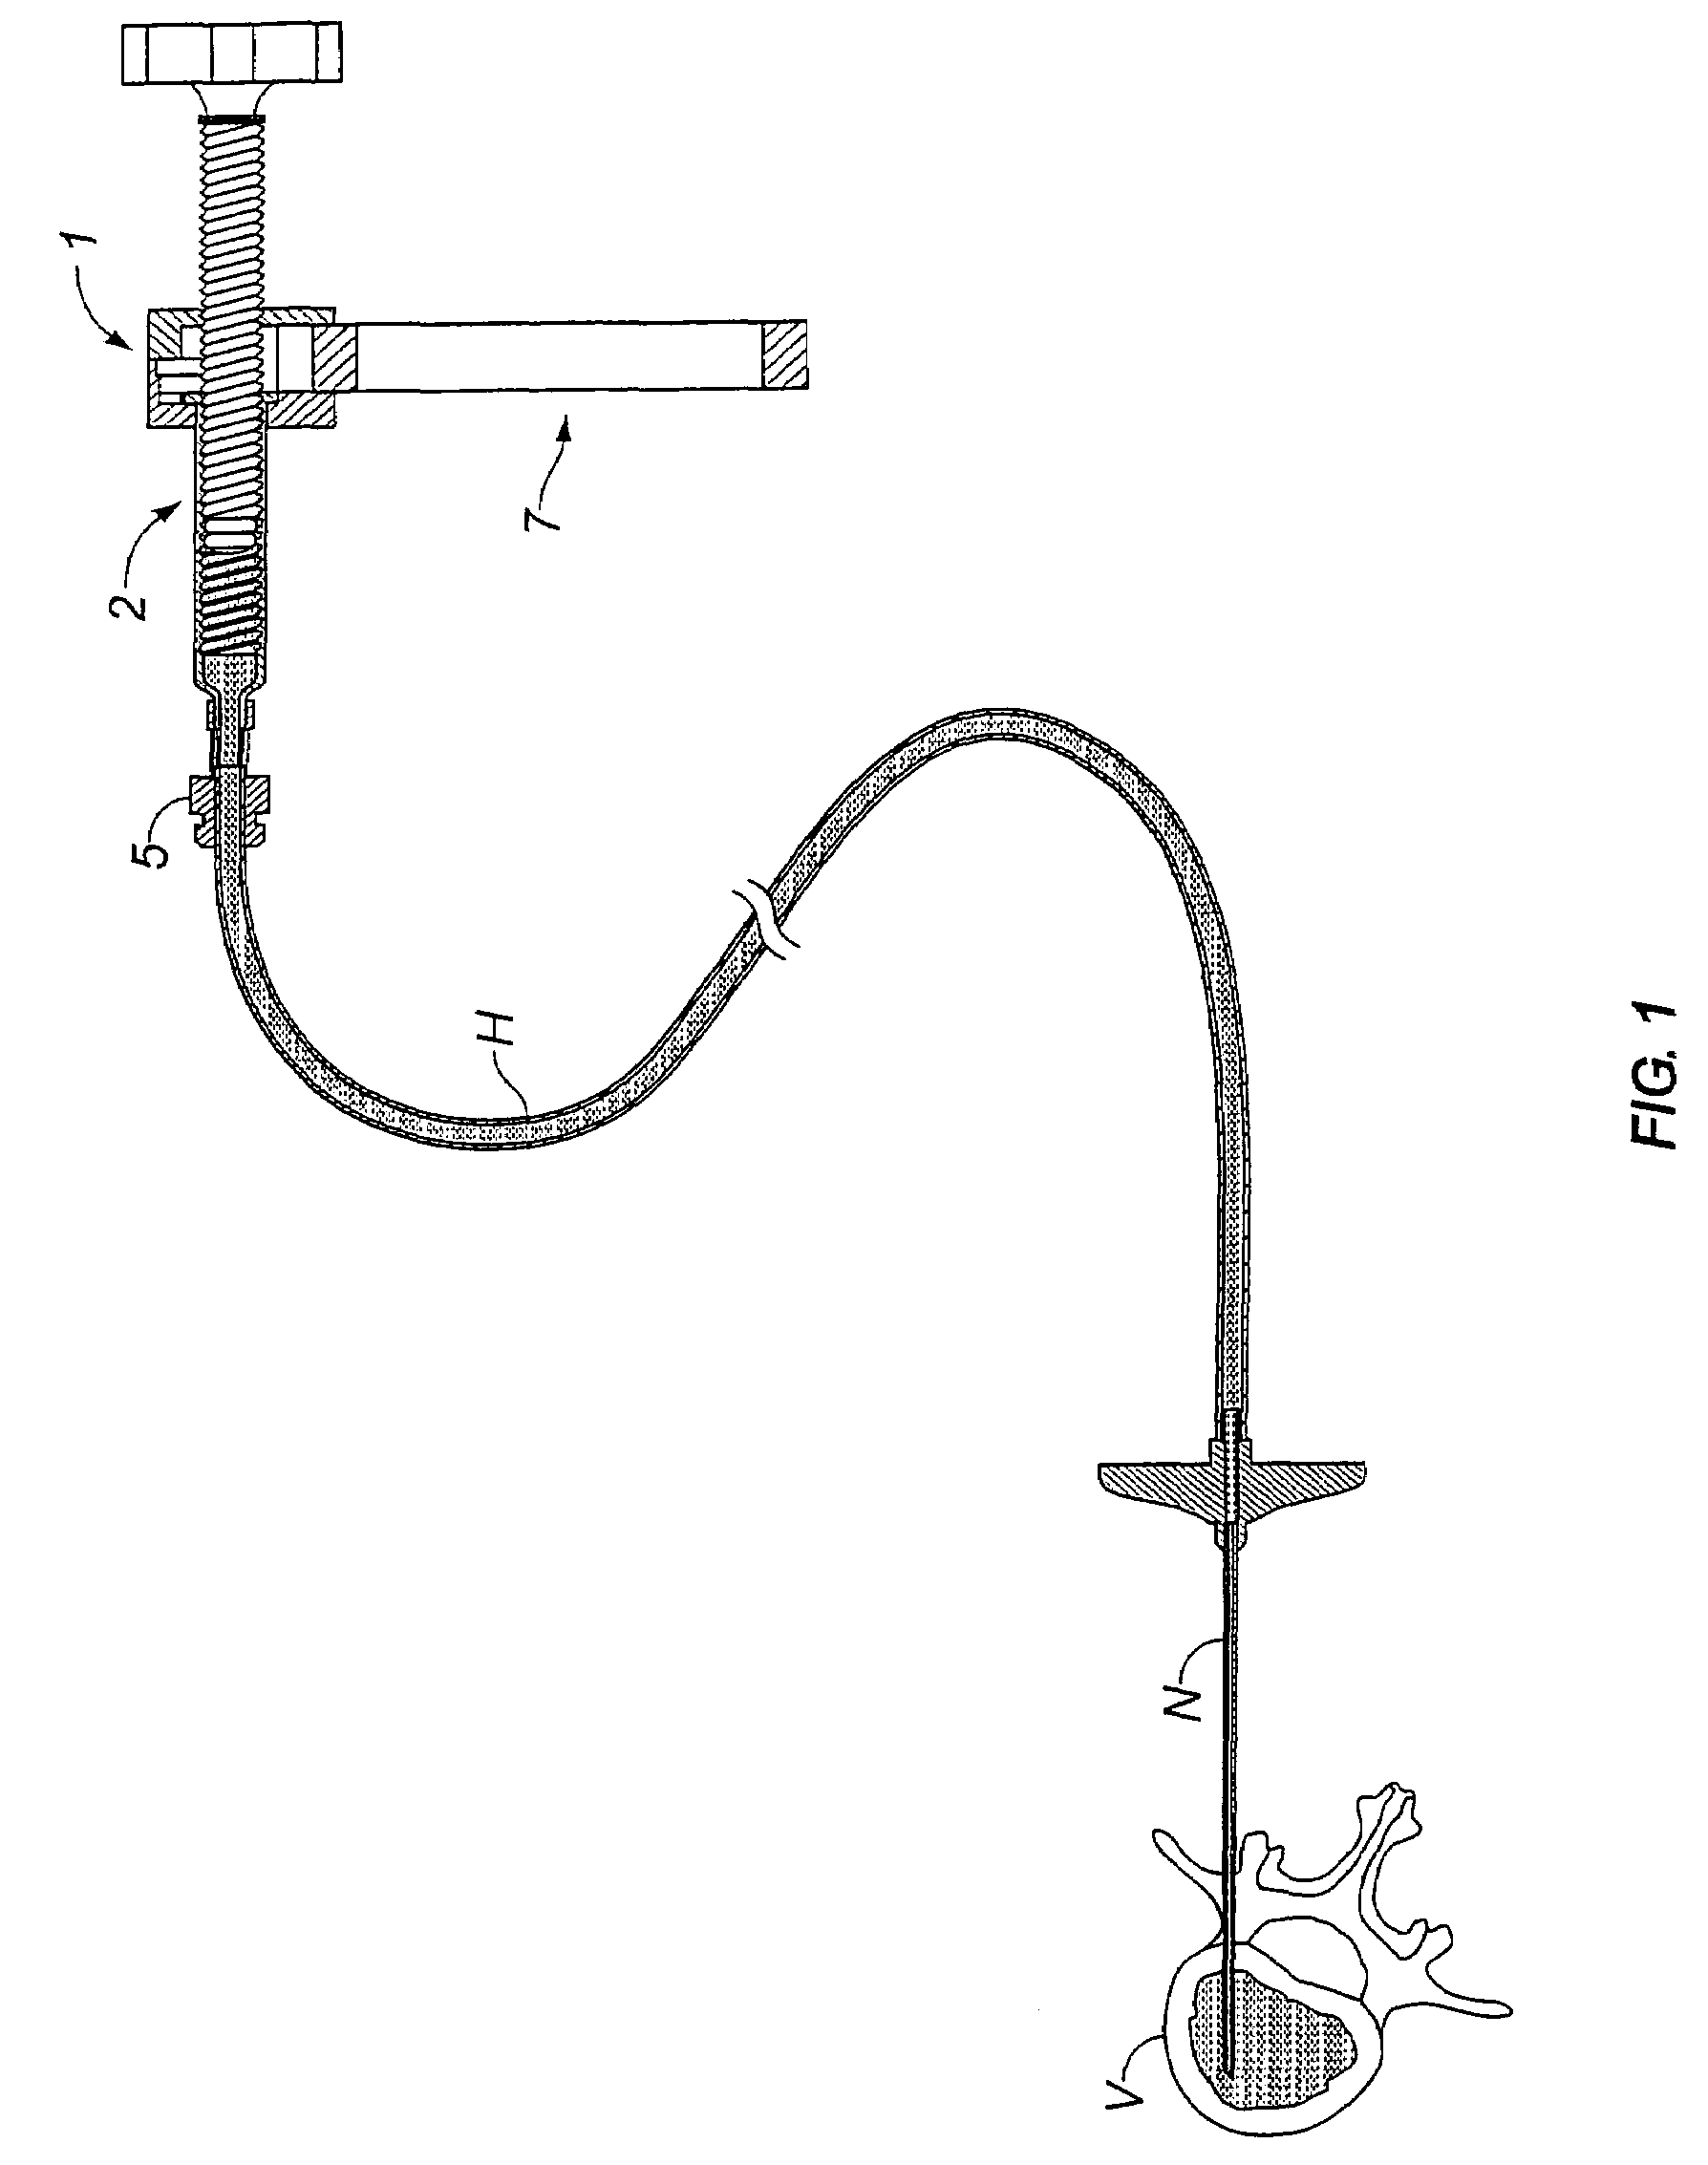 Device for the manual metering of a medical fluid, particularly bone cement